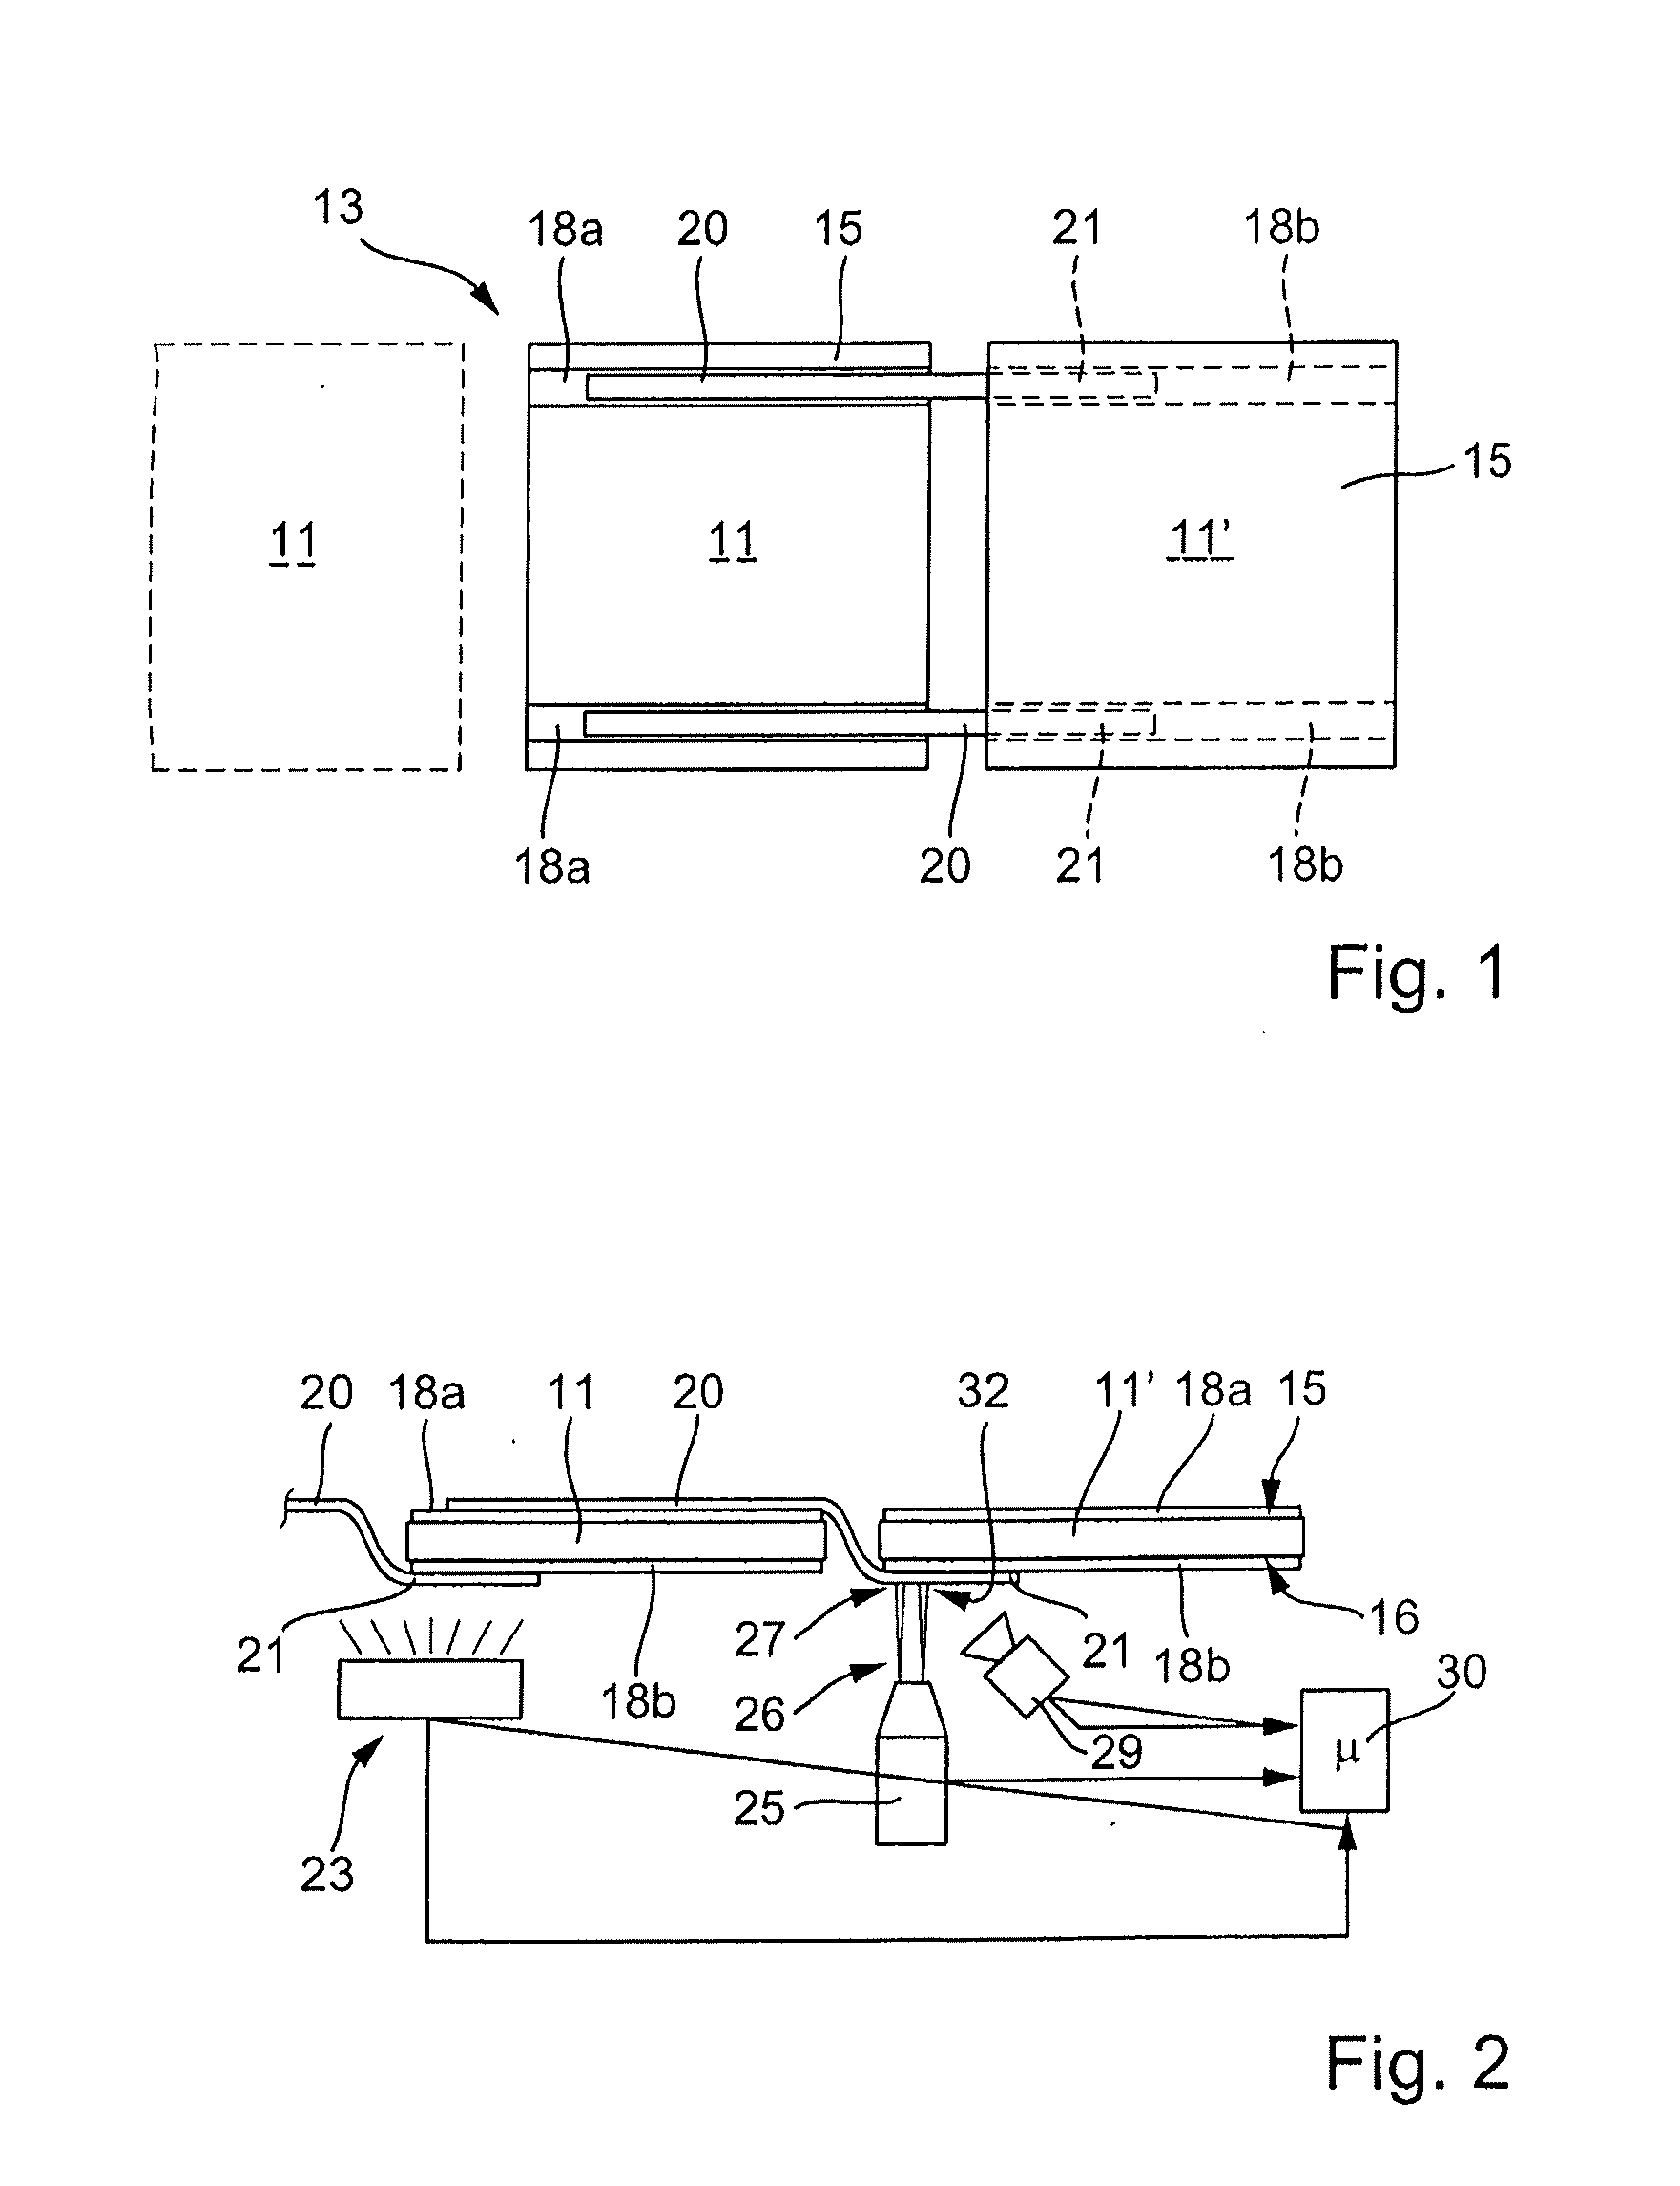 Method for Soldering Contact Wires to Solar Cells